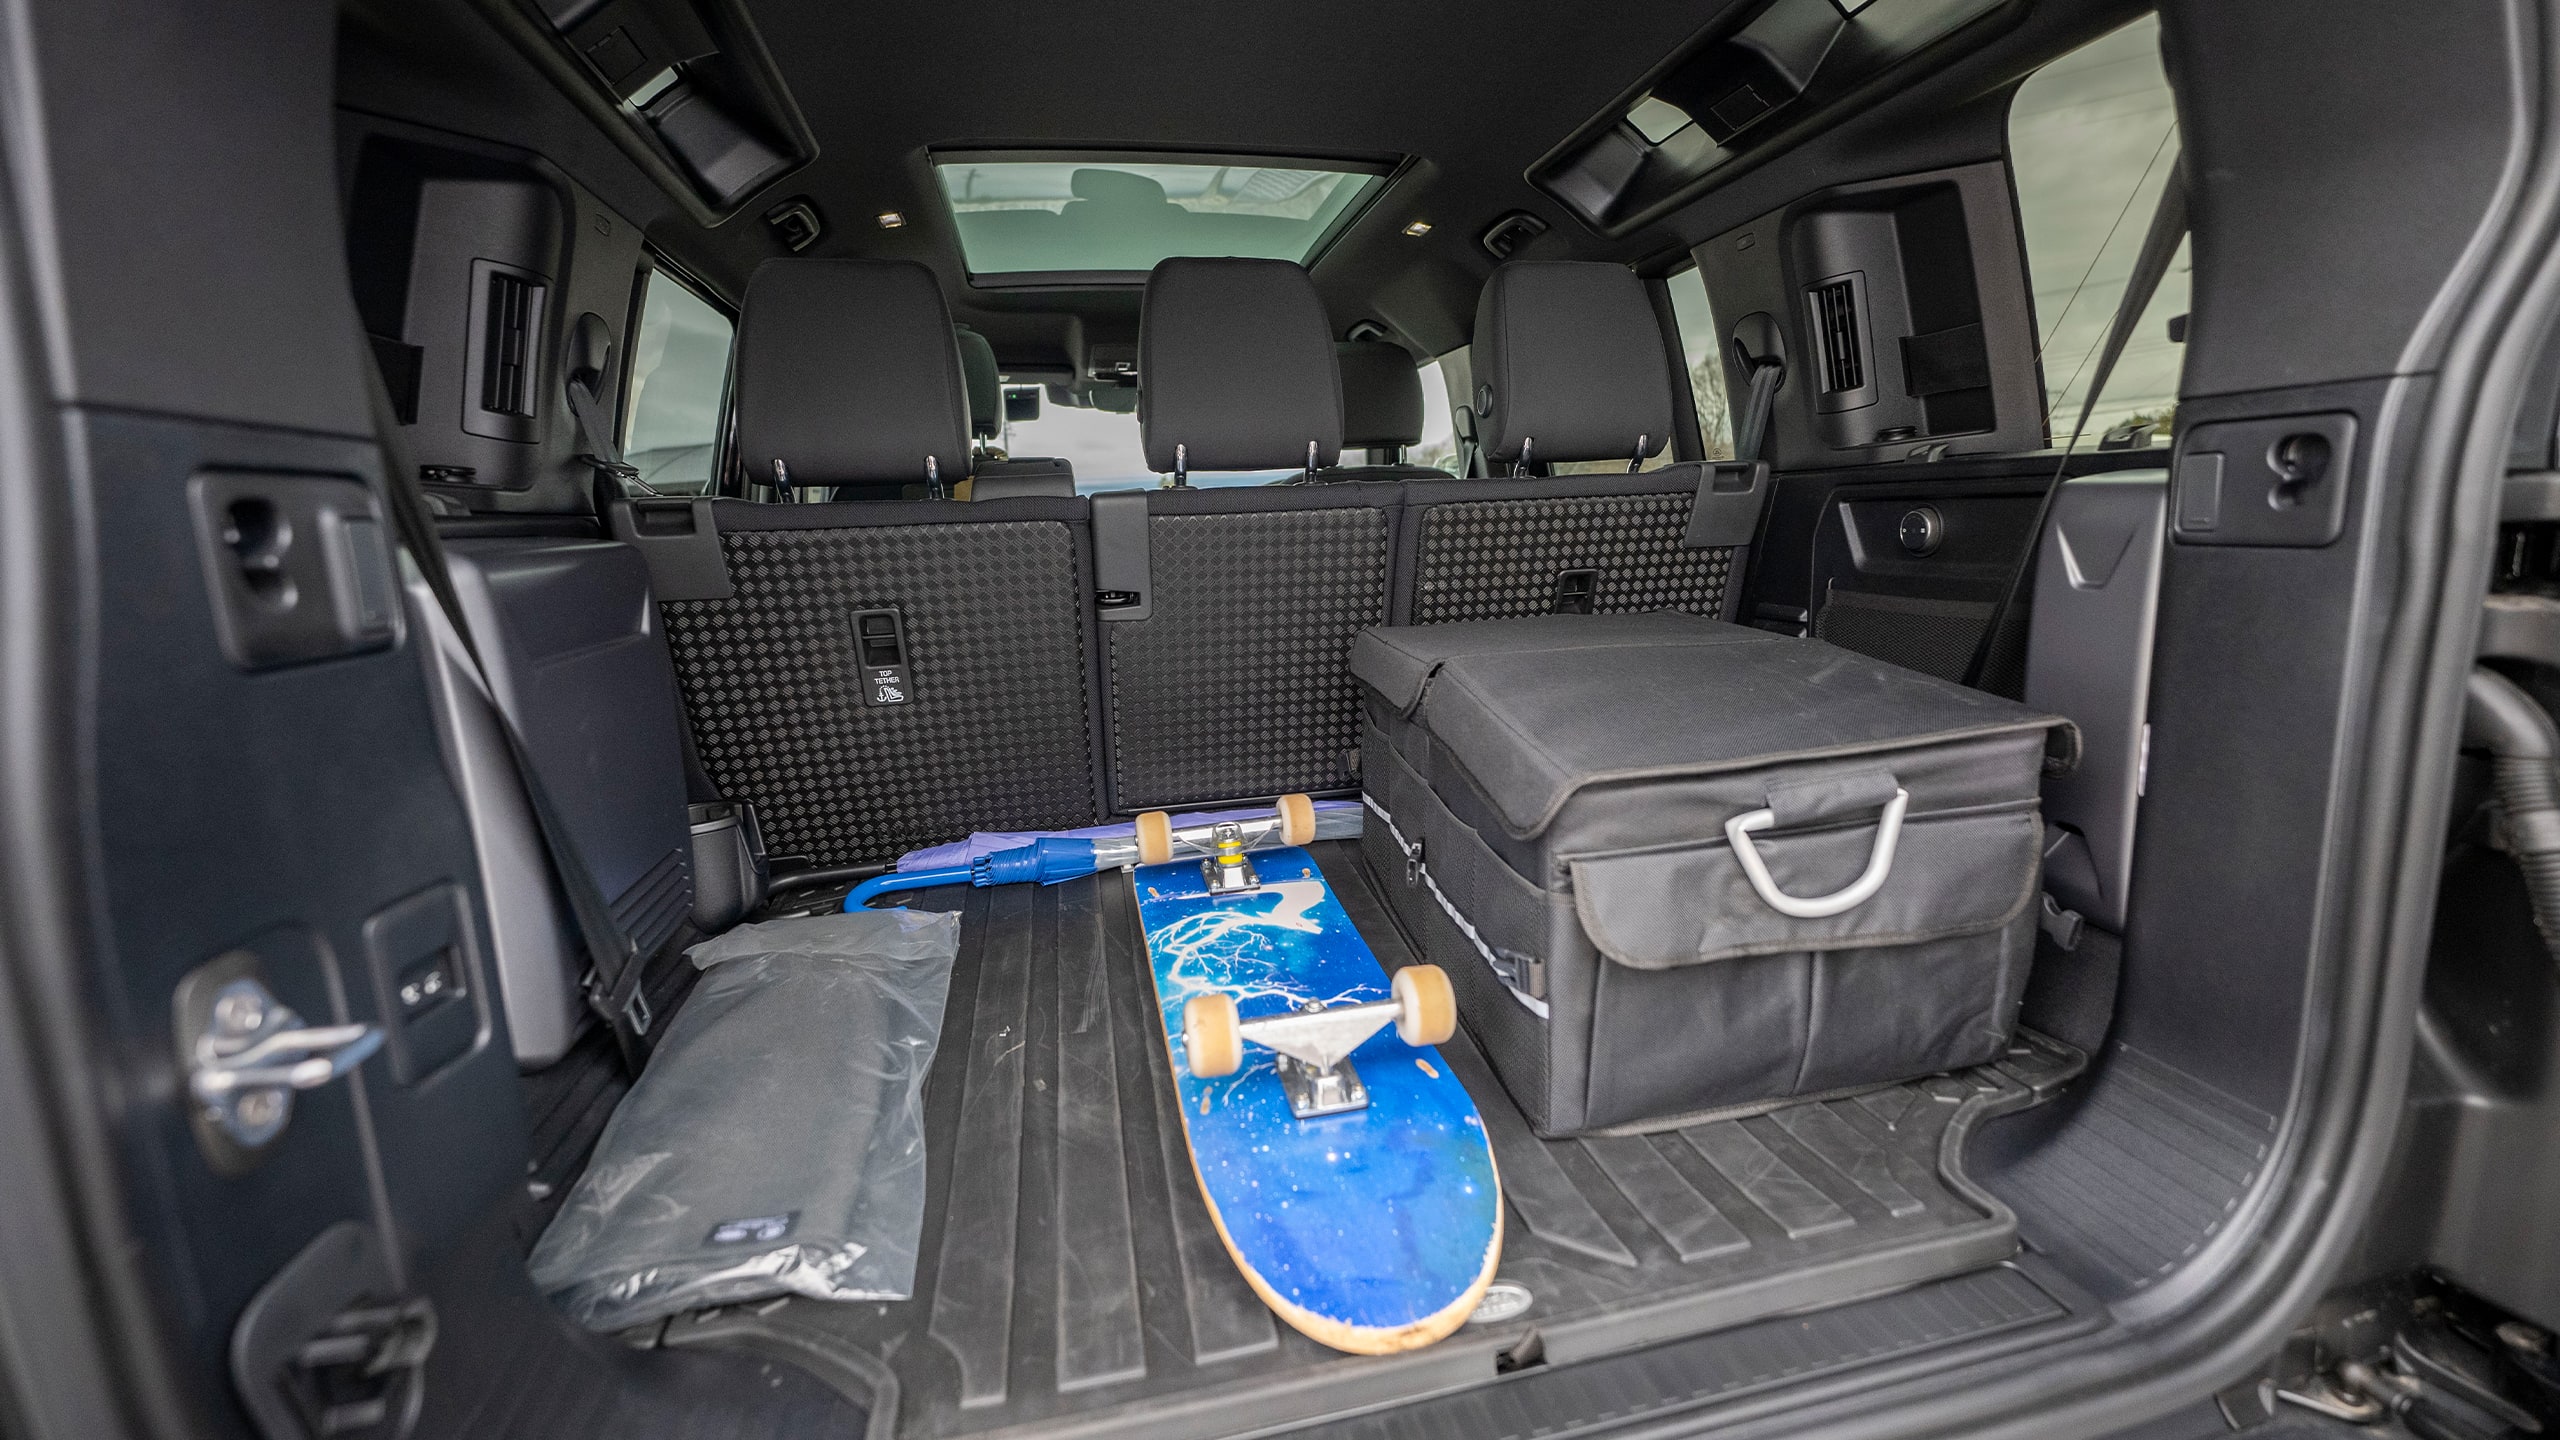 Luggage Compartment View of Defender